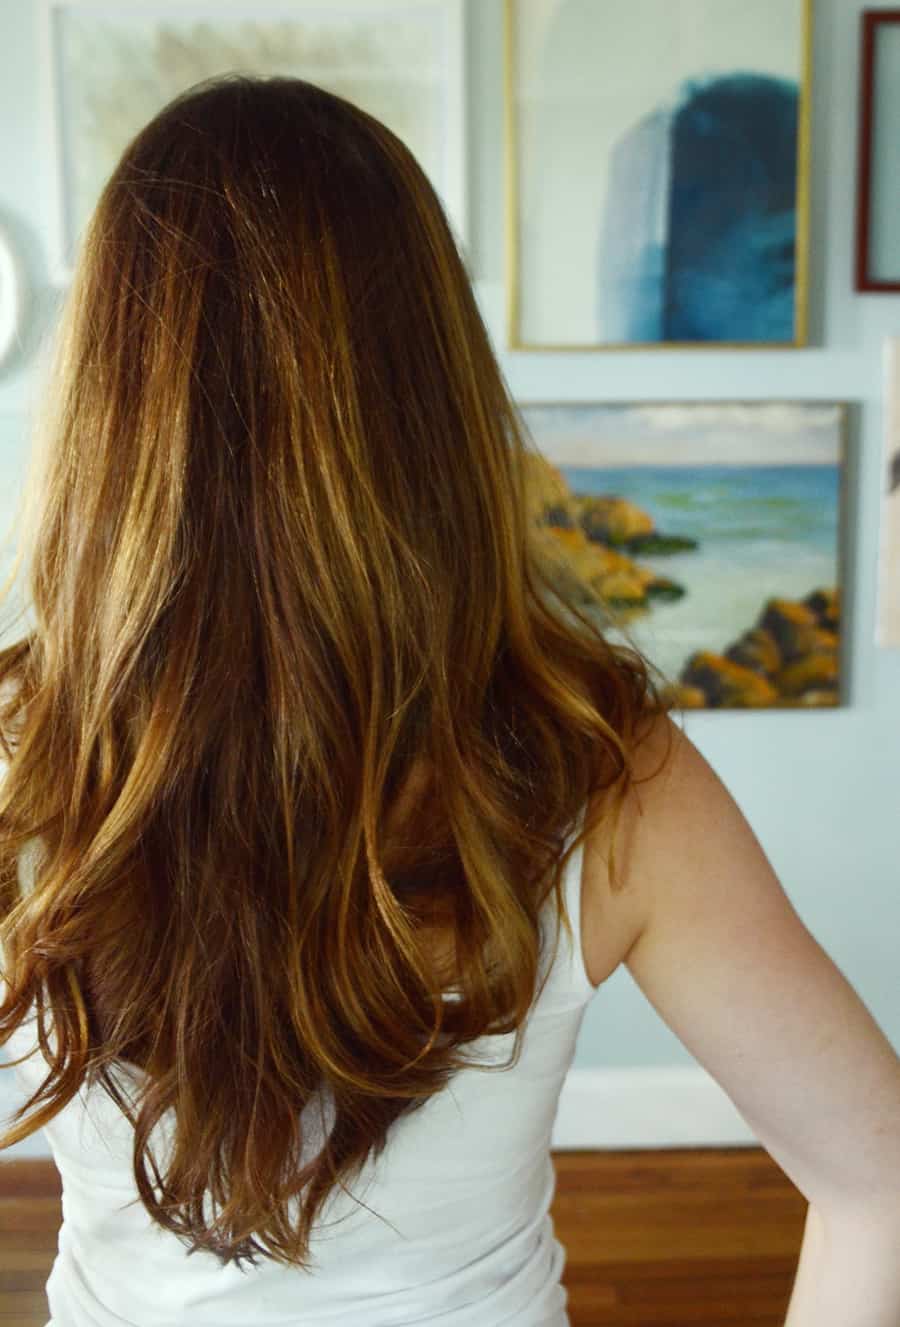 How To Curl Your Hair And Create Beachy Waves With a Curling Wand